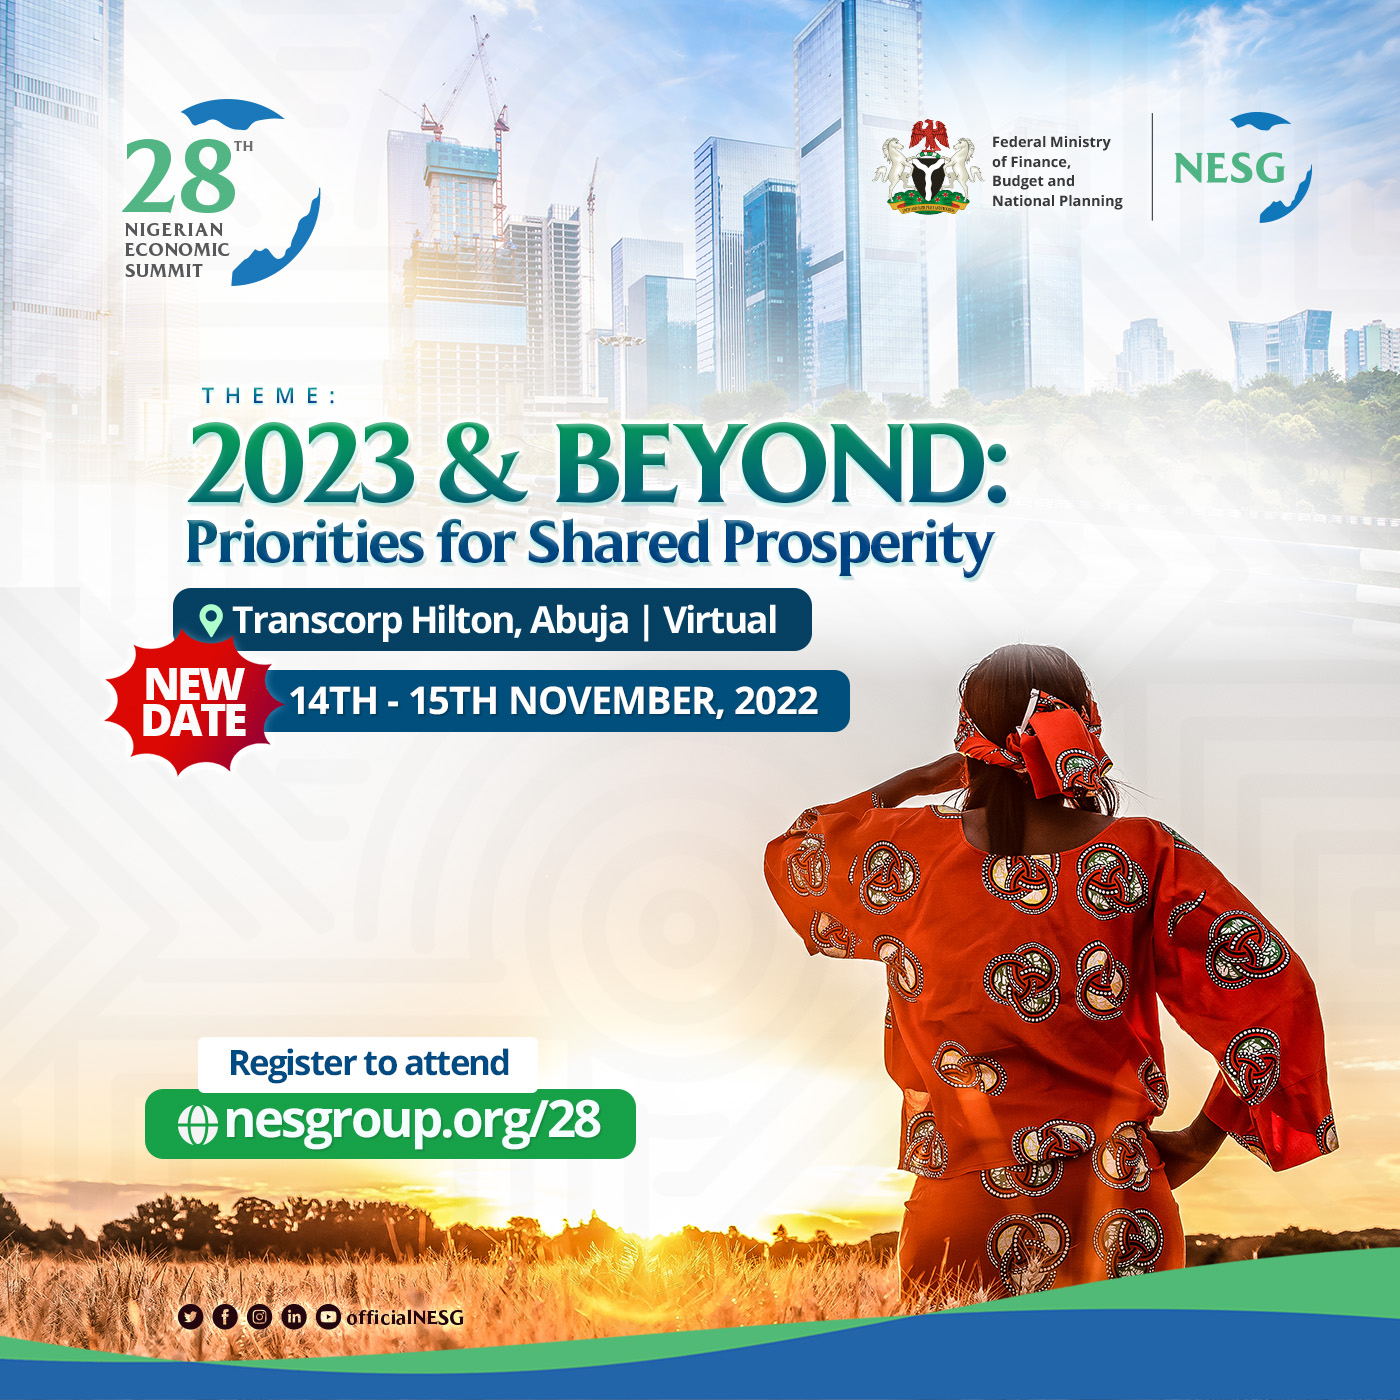 The 28th Nigerian Economic Summit Rescheduled to 14h and 15th November 2022